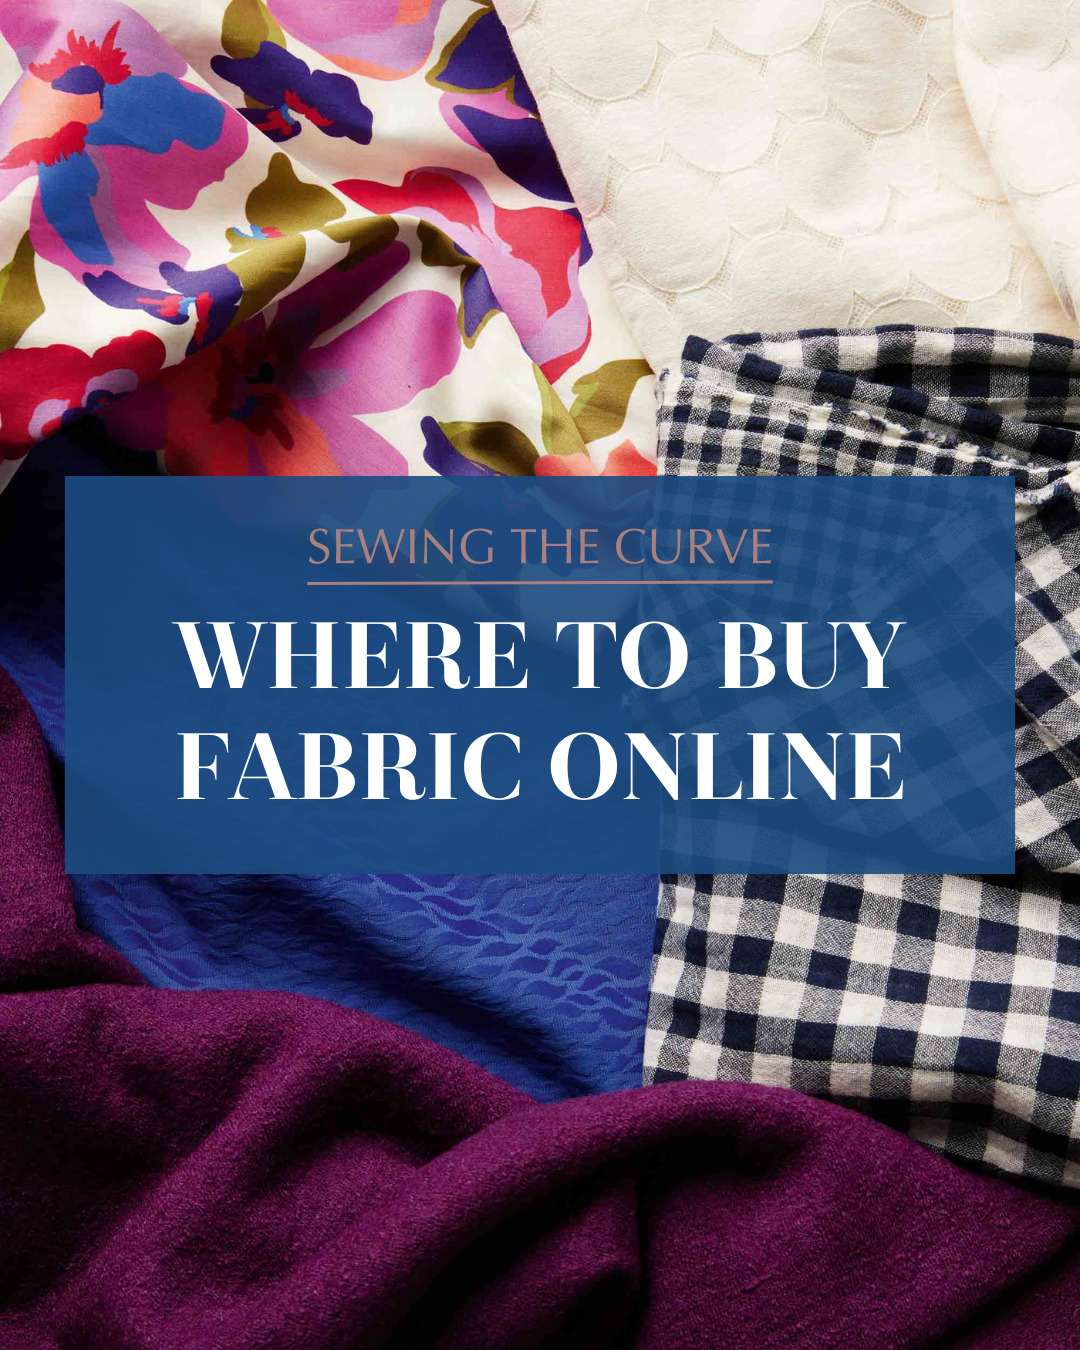 Where to Buy Fabric Online